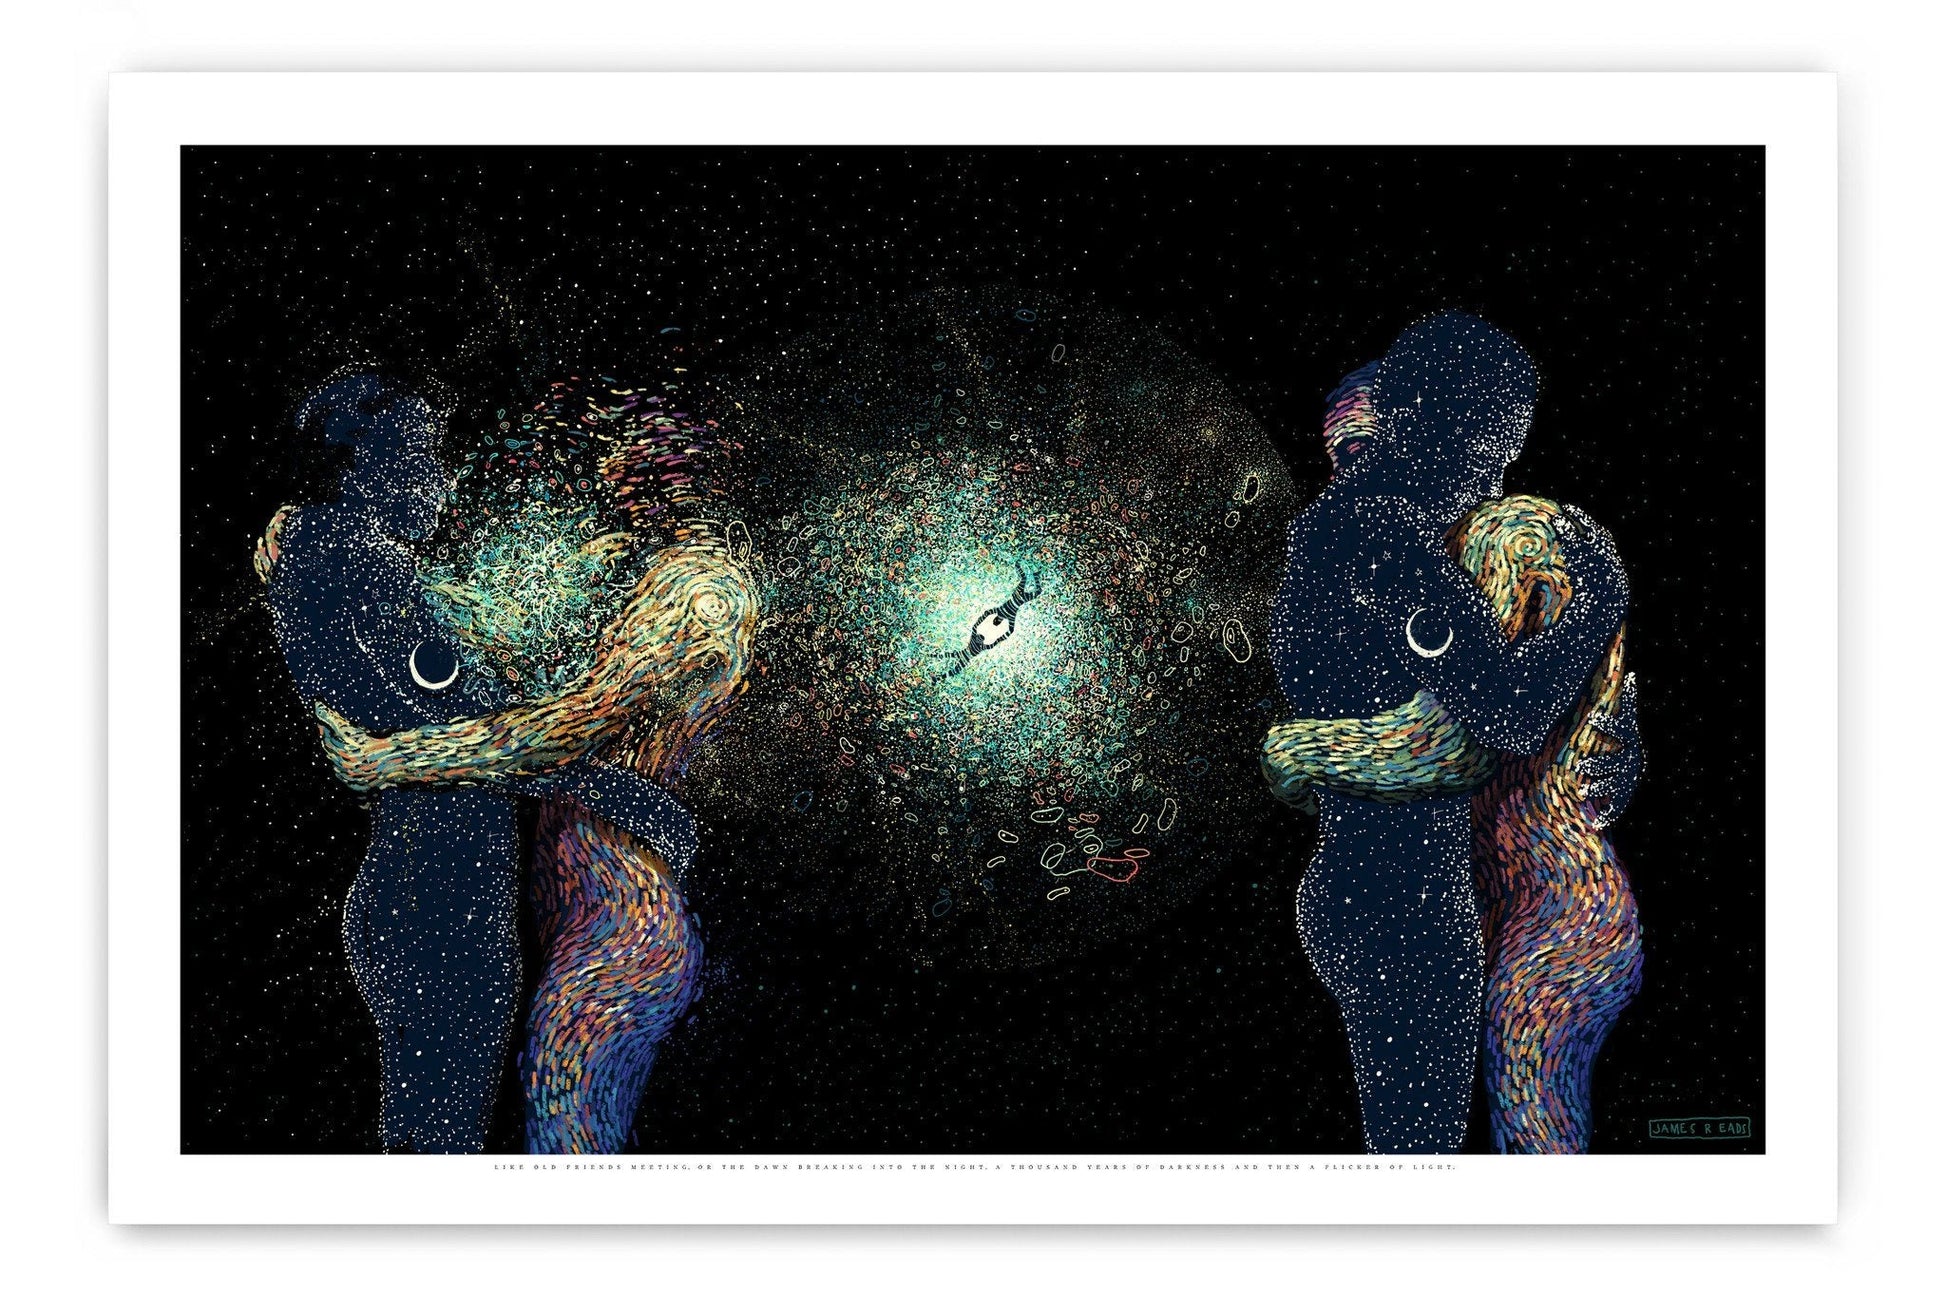 A Flicker of Light (Limited Edition 10) James R. Eads